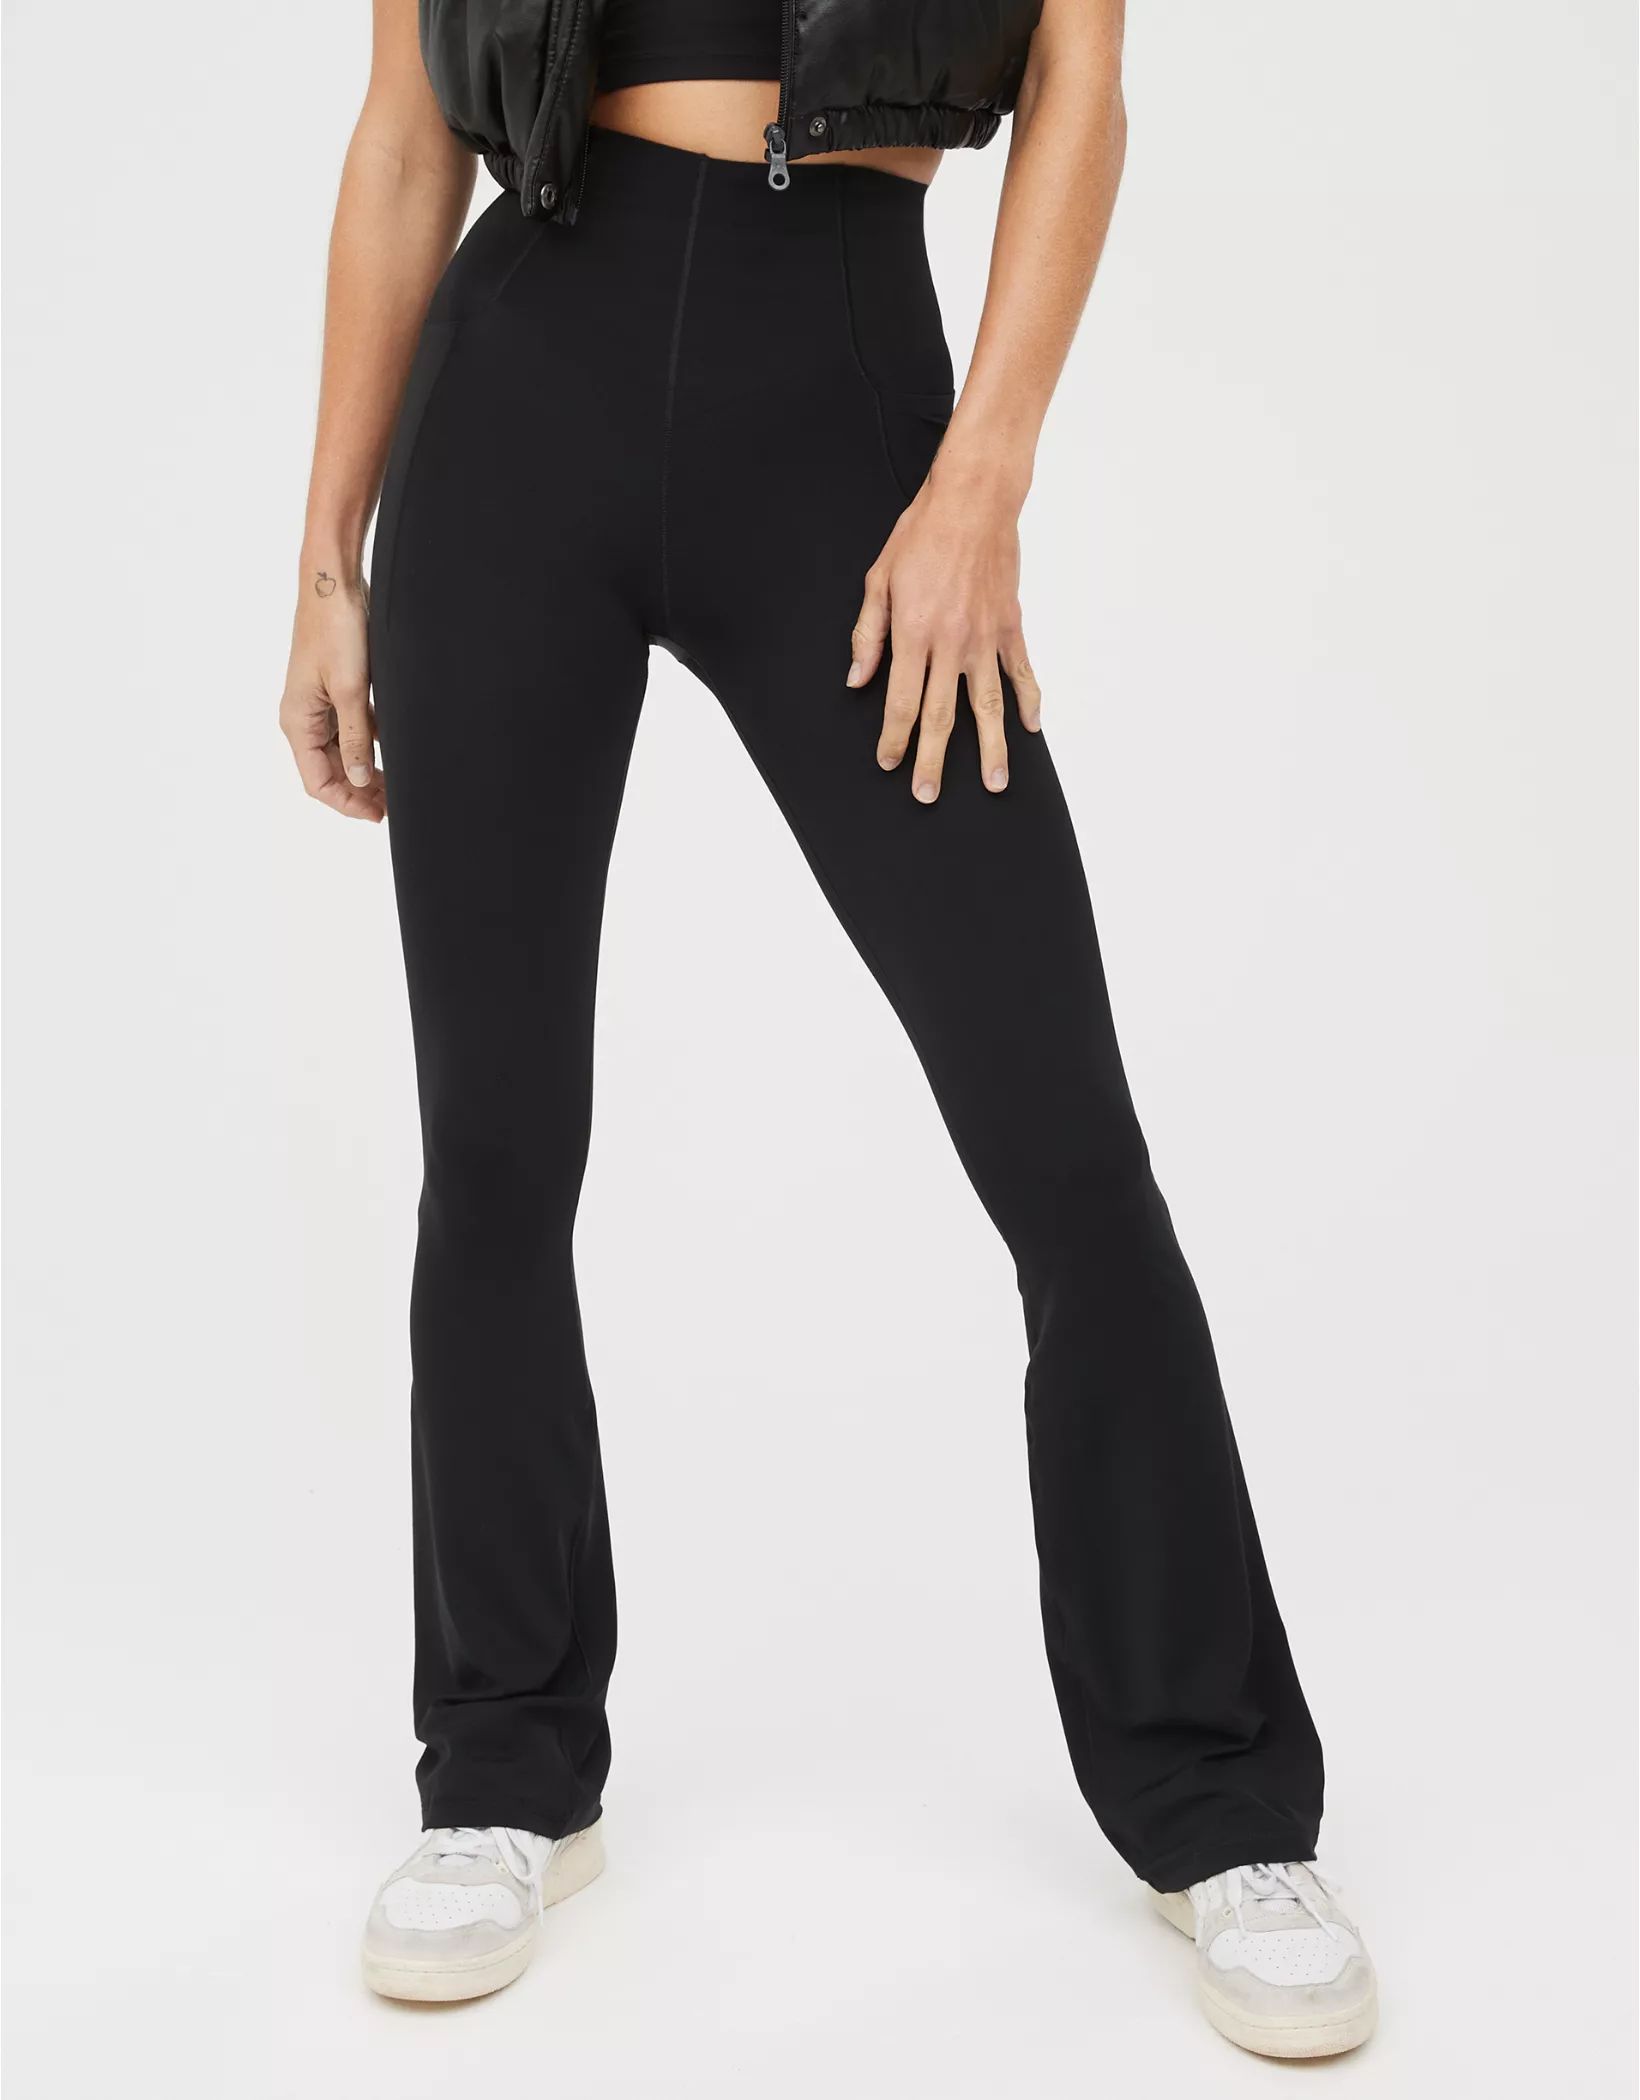 OFFLINE By Aerie Real Me Xtra Hold Up! Pocket Bootcut Legging | Aerie